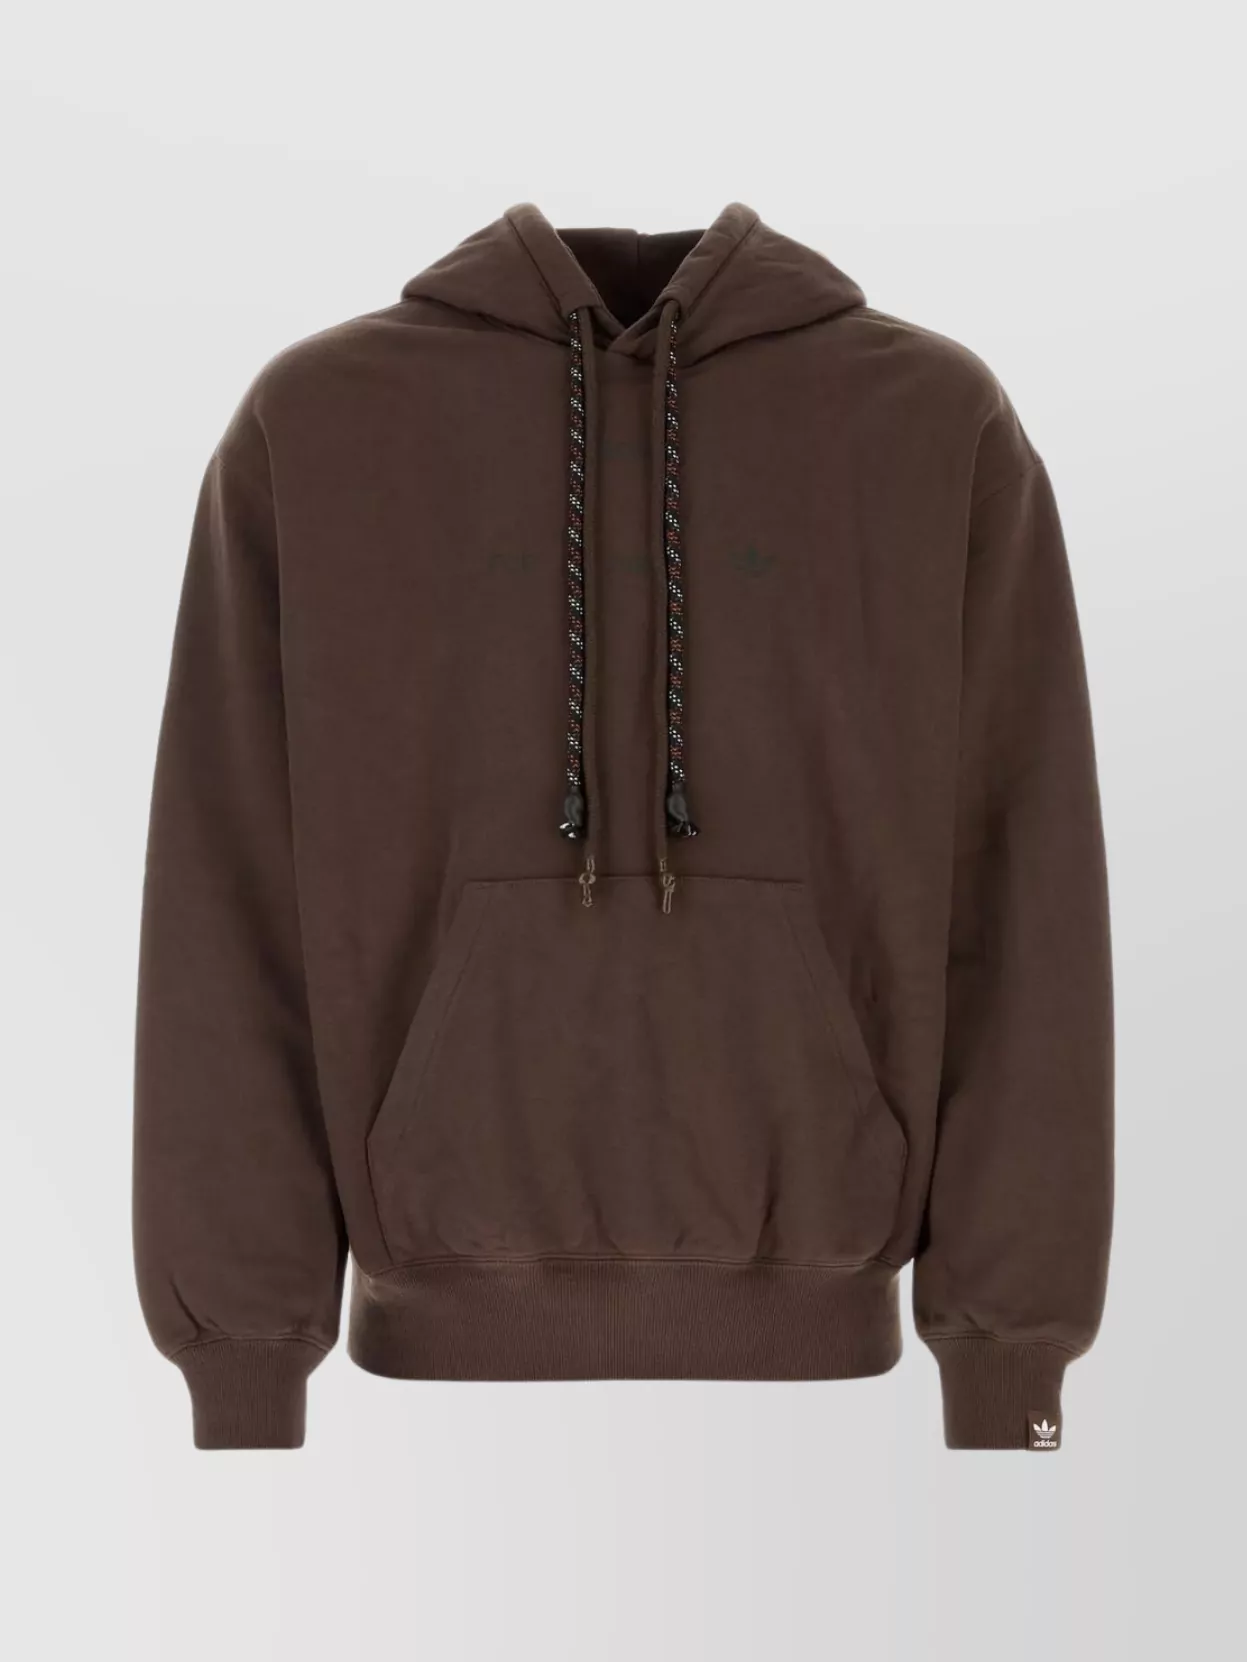 Adidas Originals Cotton Song For The Mute Sweatshirt In Brown